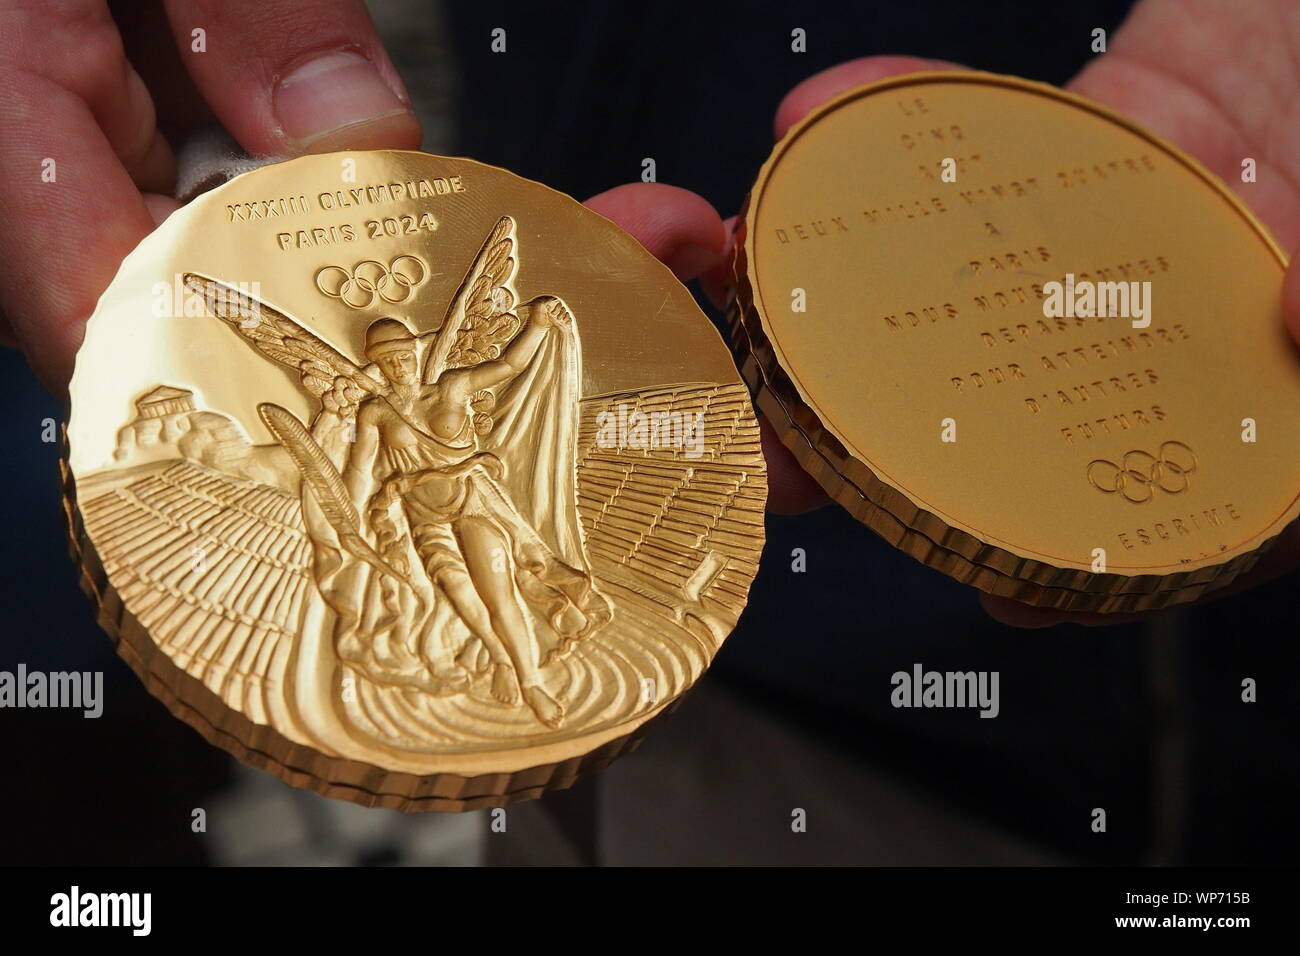 Model Of The Gold Medals That Will Be Used In The Olympic Games Paris 2024 Is Presented At The 130th Session Of The International Olympic Committee Which Is Being Held In Lima WP715B 